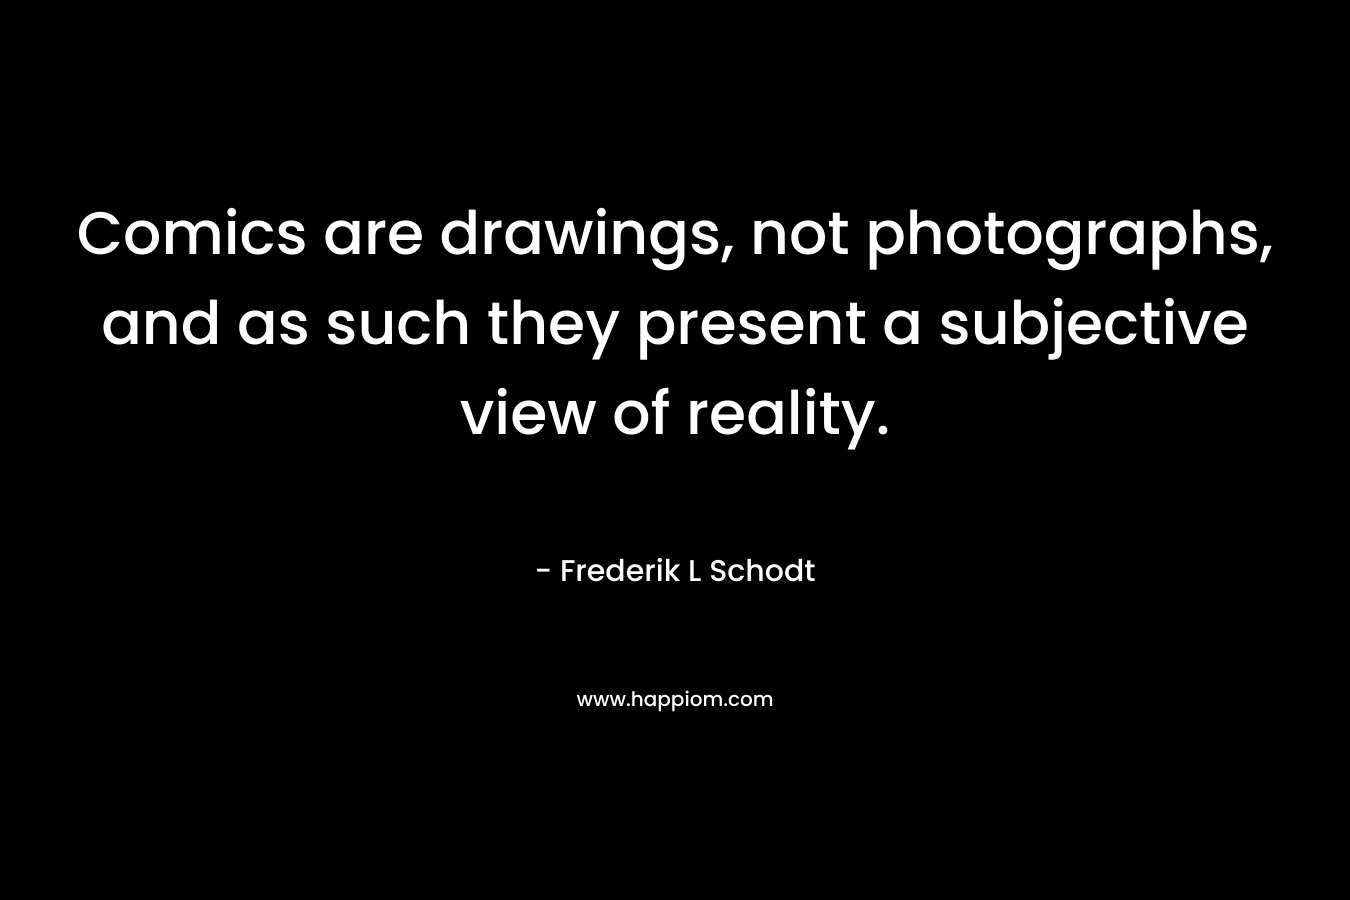 Comics are drawings, not photographs, and as such they present a subjective view of reality. – Frederik L Schodt